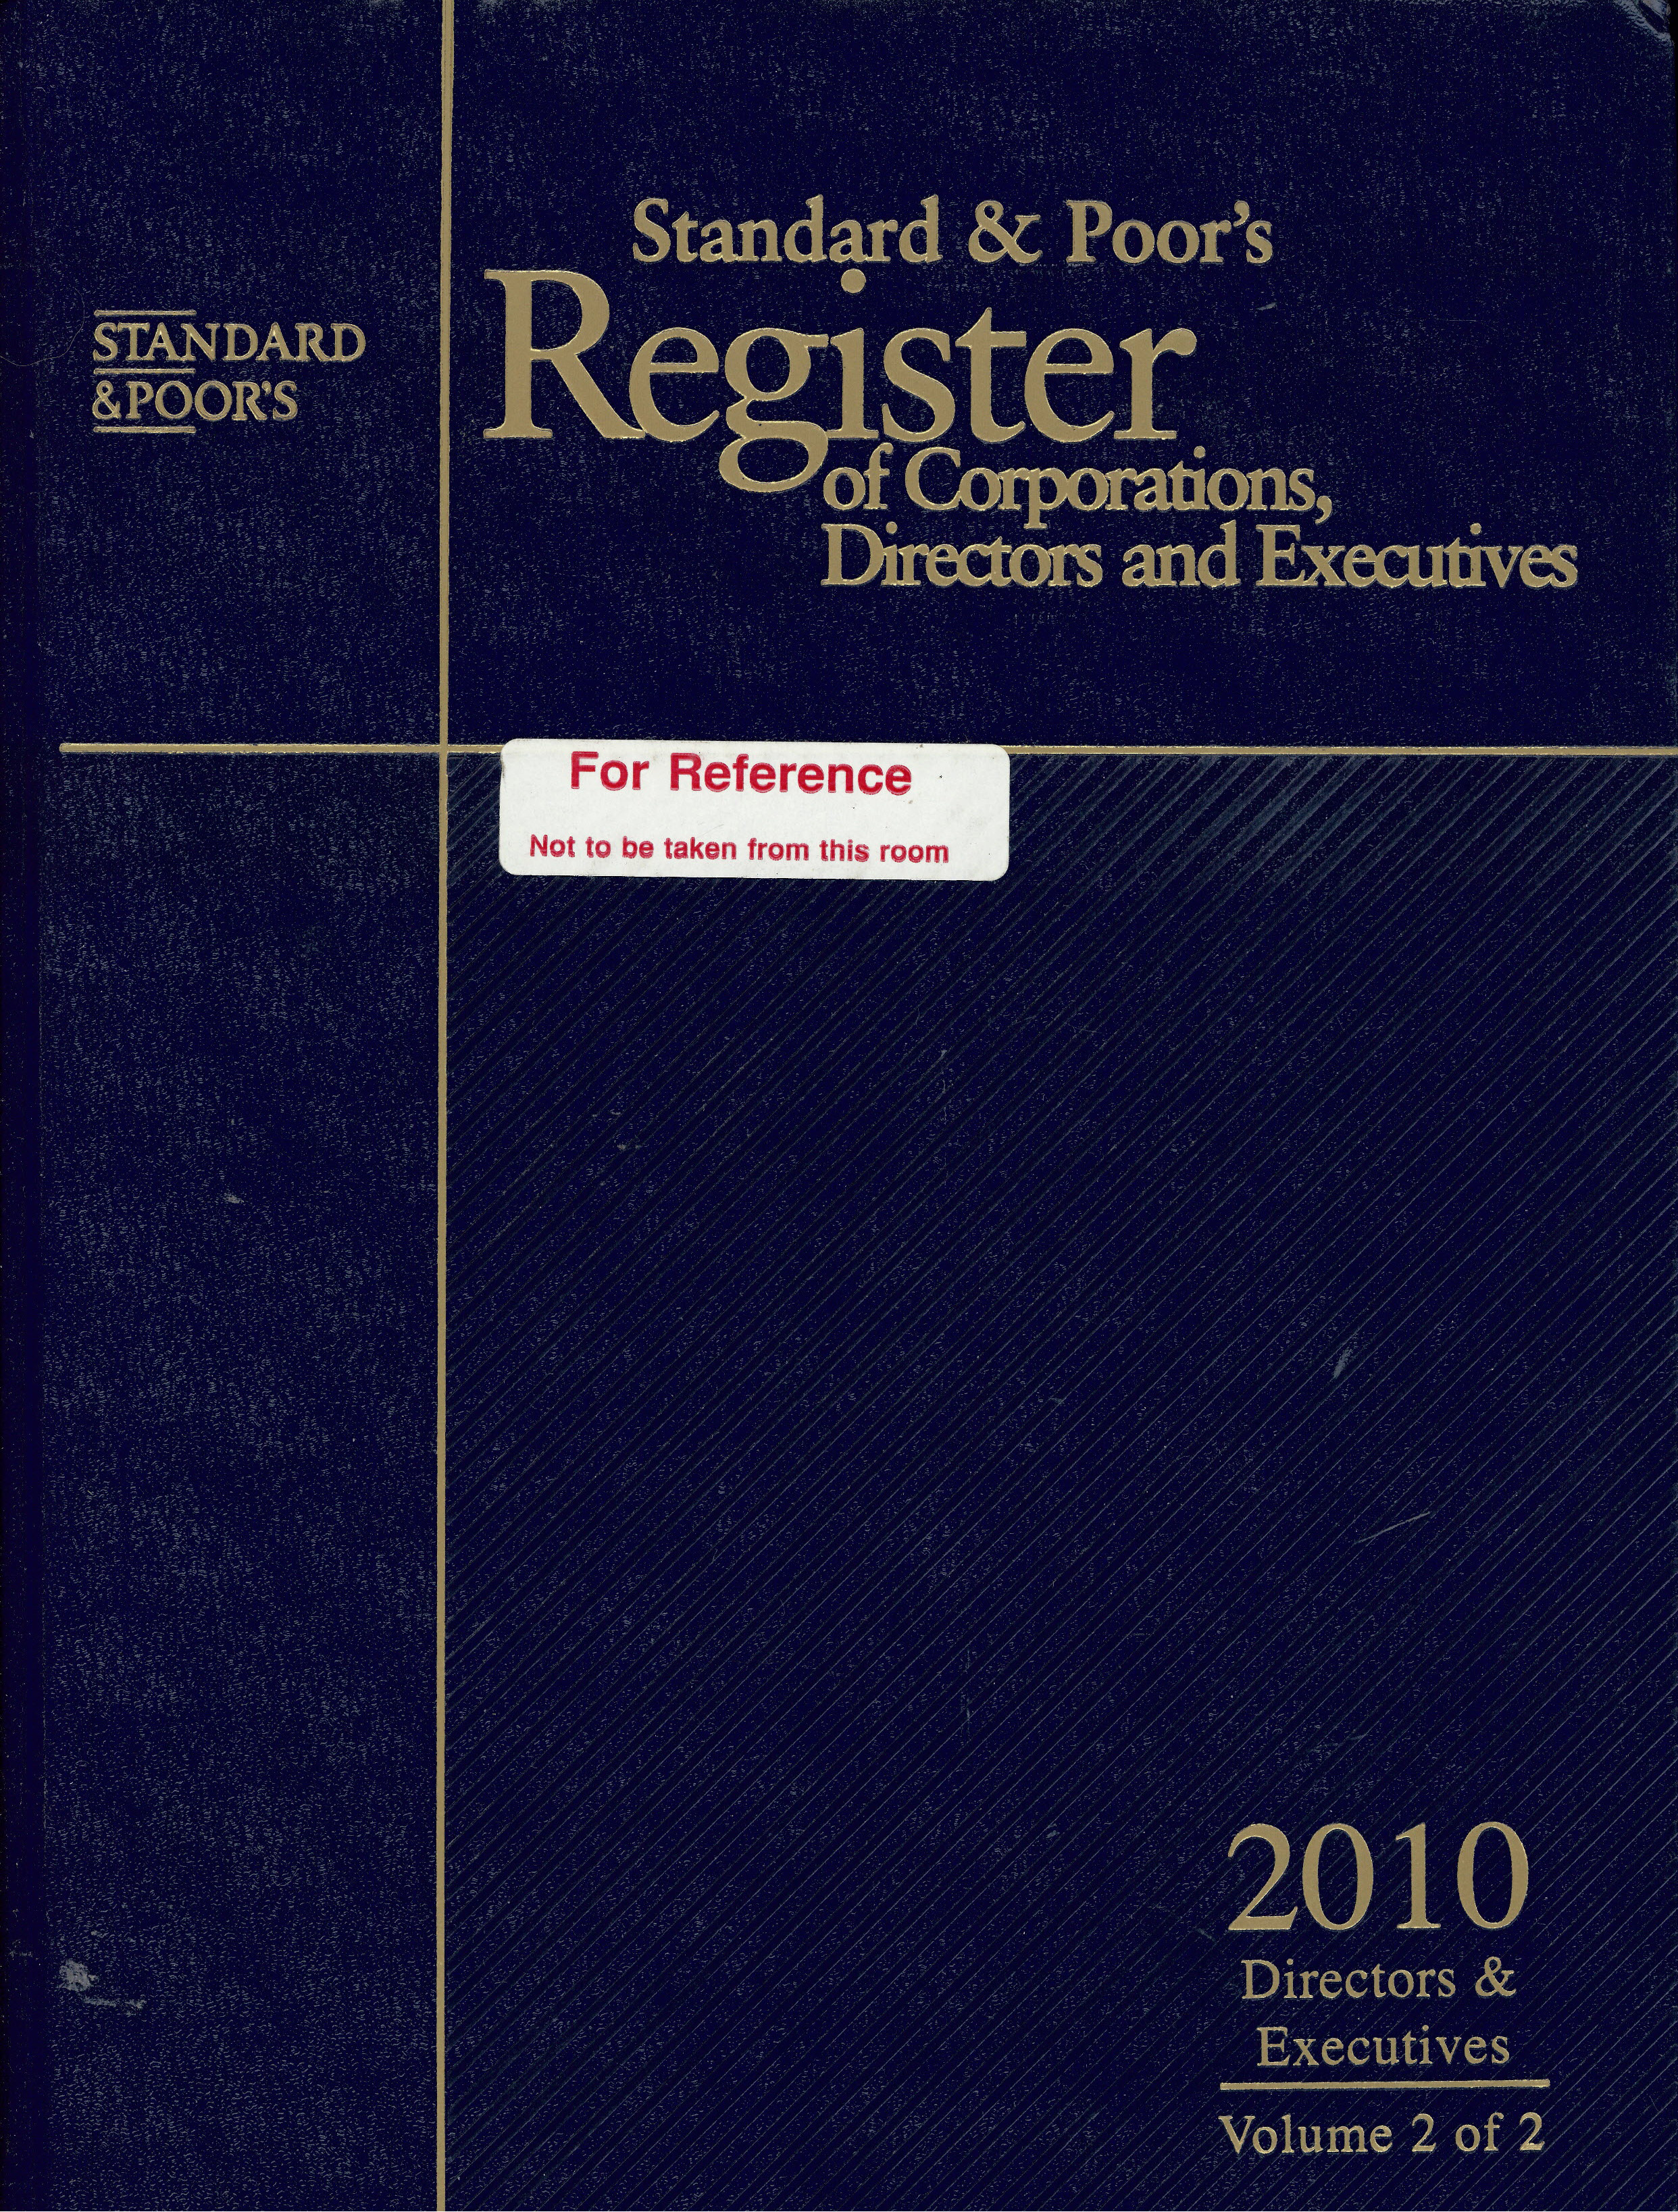 Standard & Poor's register of corporations, directors and executives.